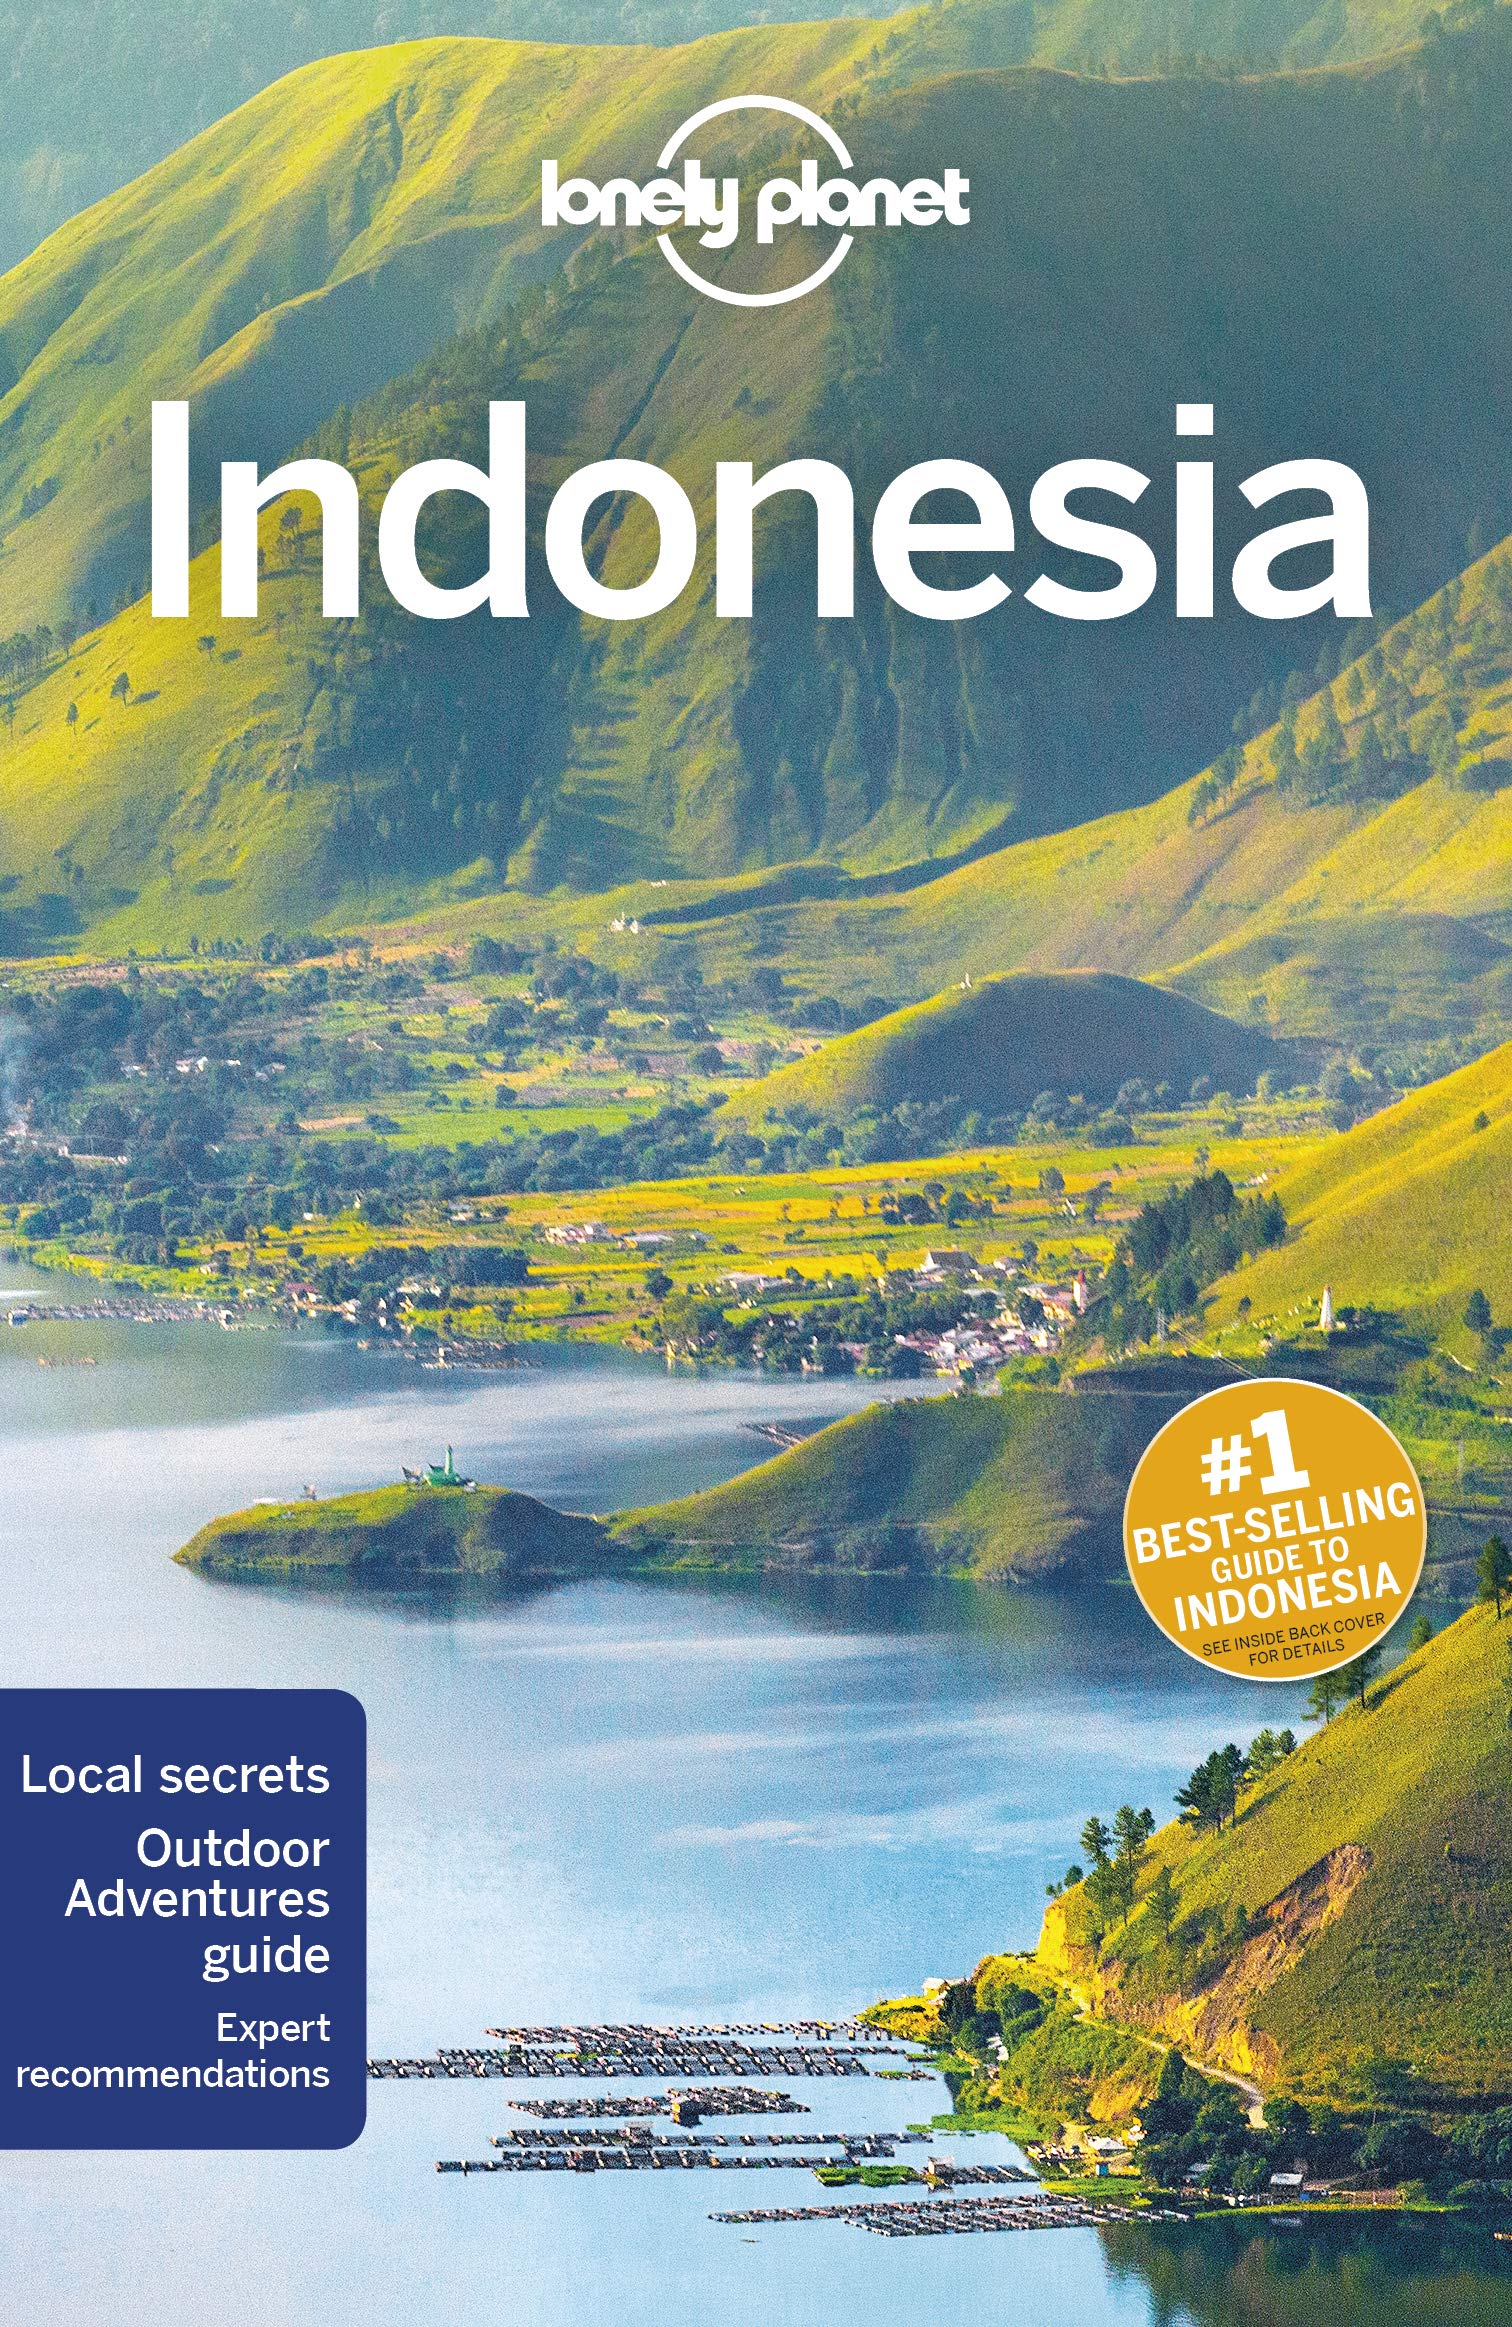 Lonely Planet Indonesia |  image19